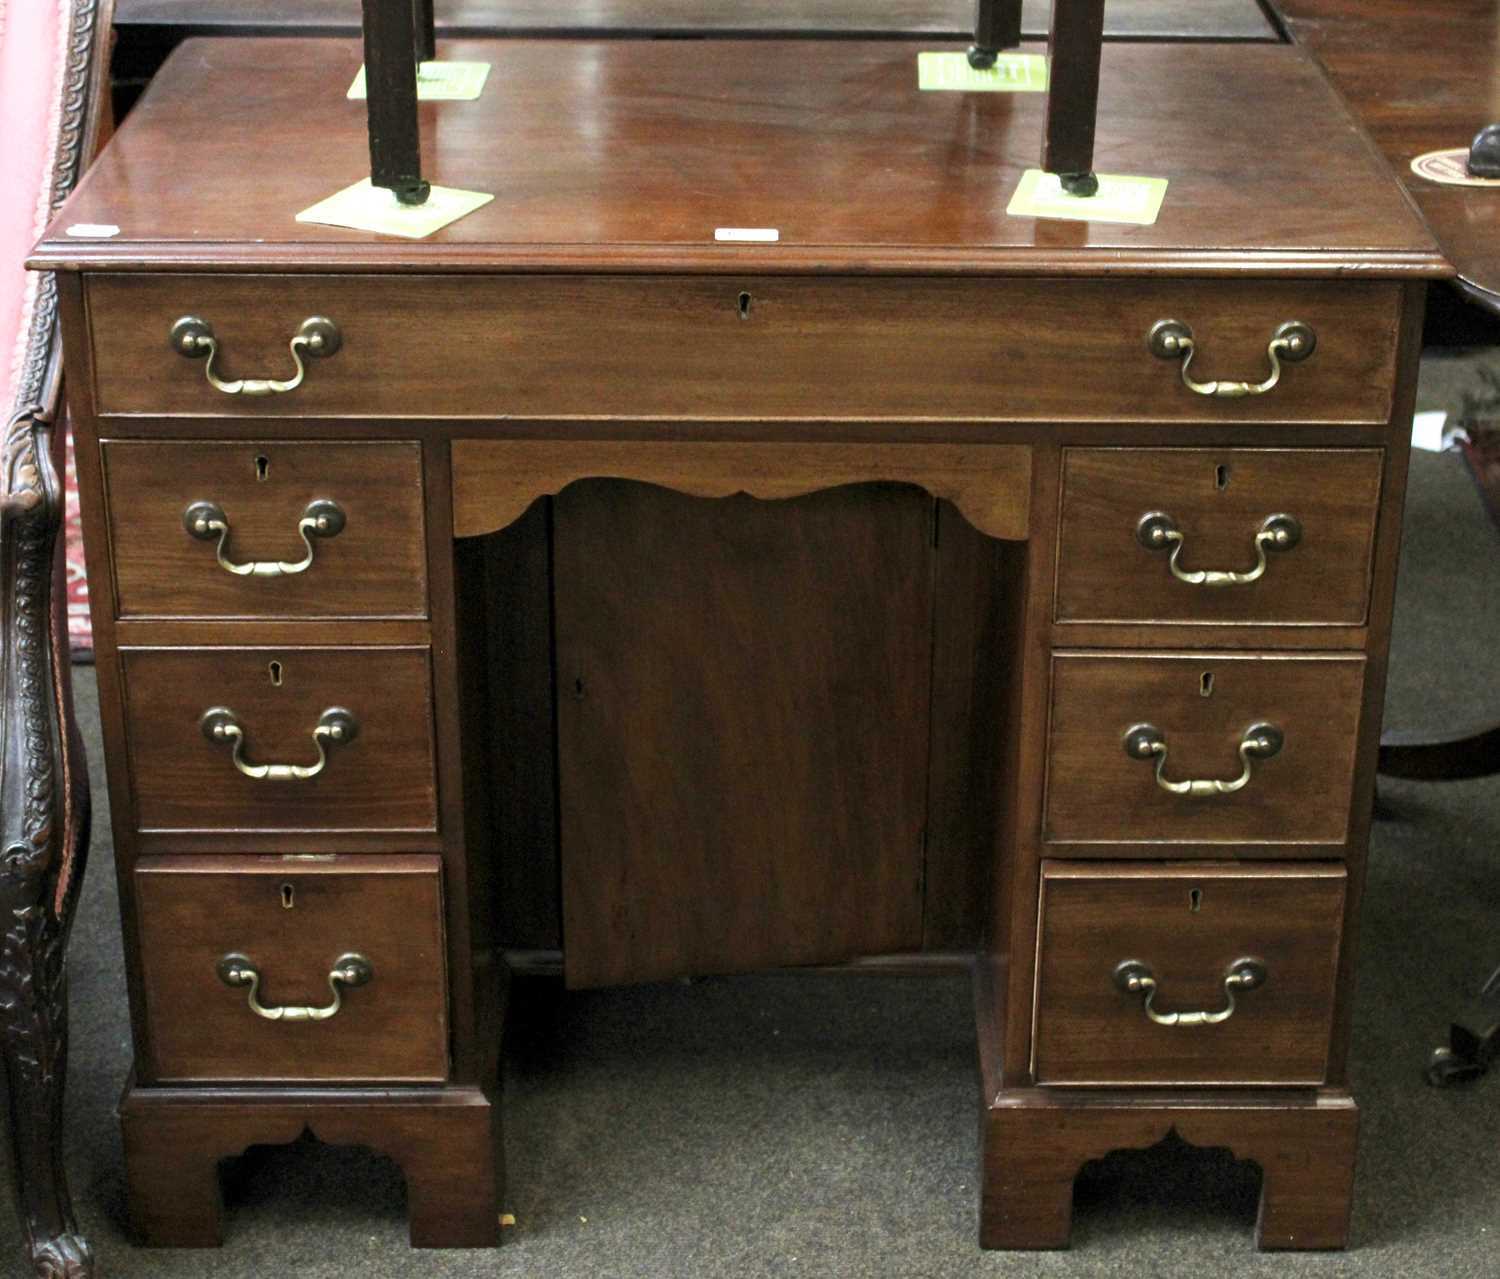 A George III Style Mahogany Kneehole Desk, 88cm by 50cm by 75cm